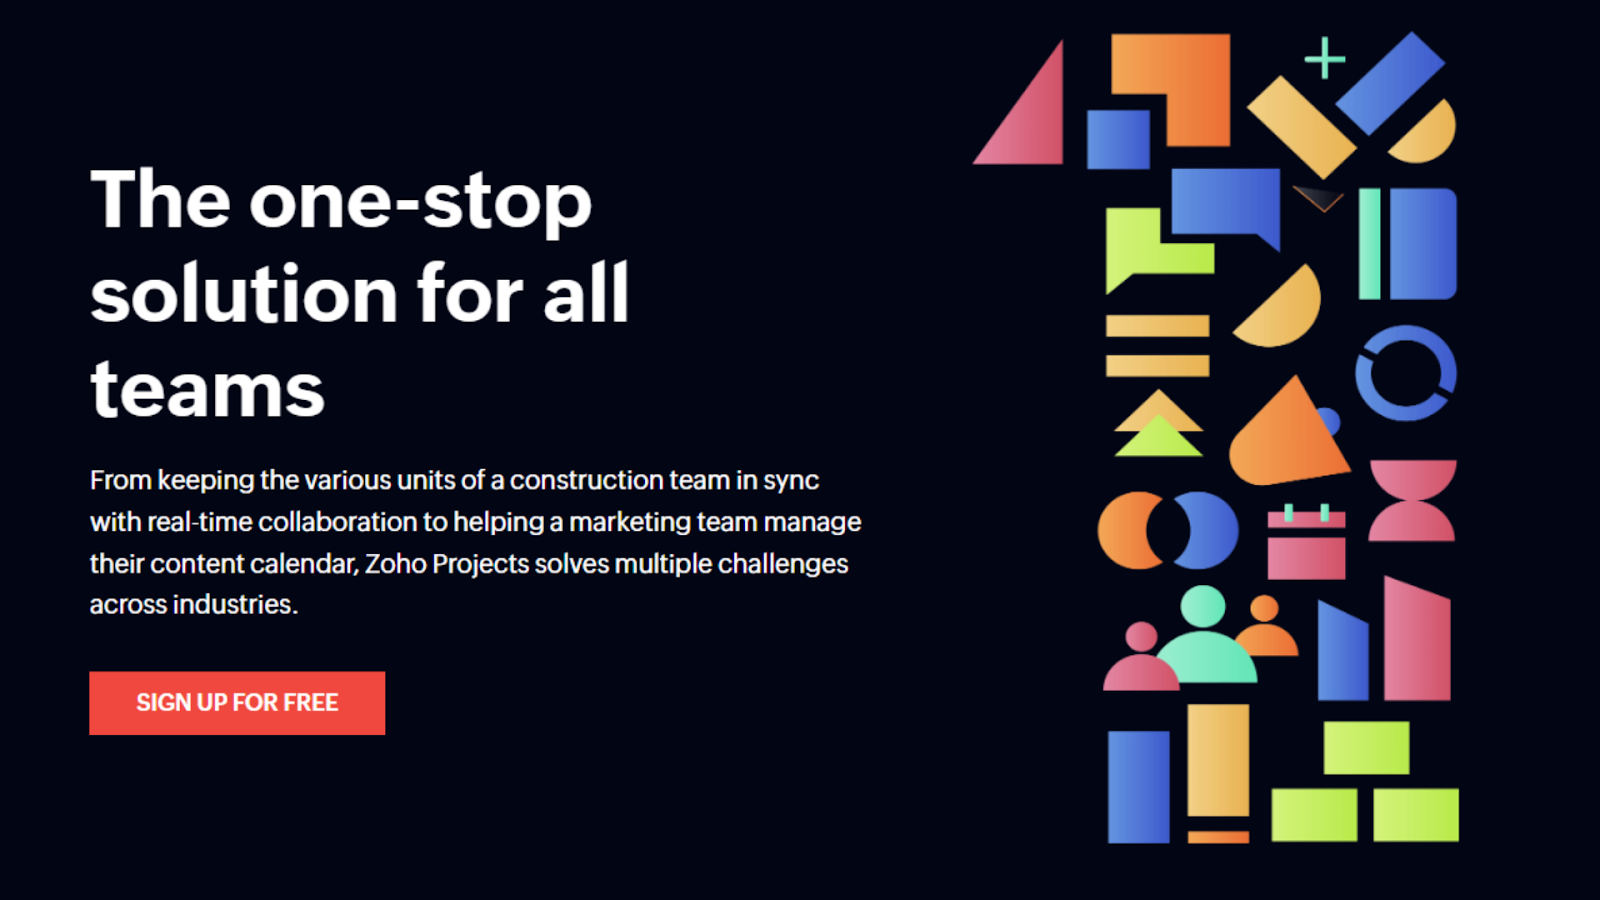 The Zoho Projects website for cloud project management